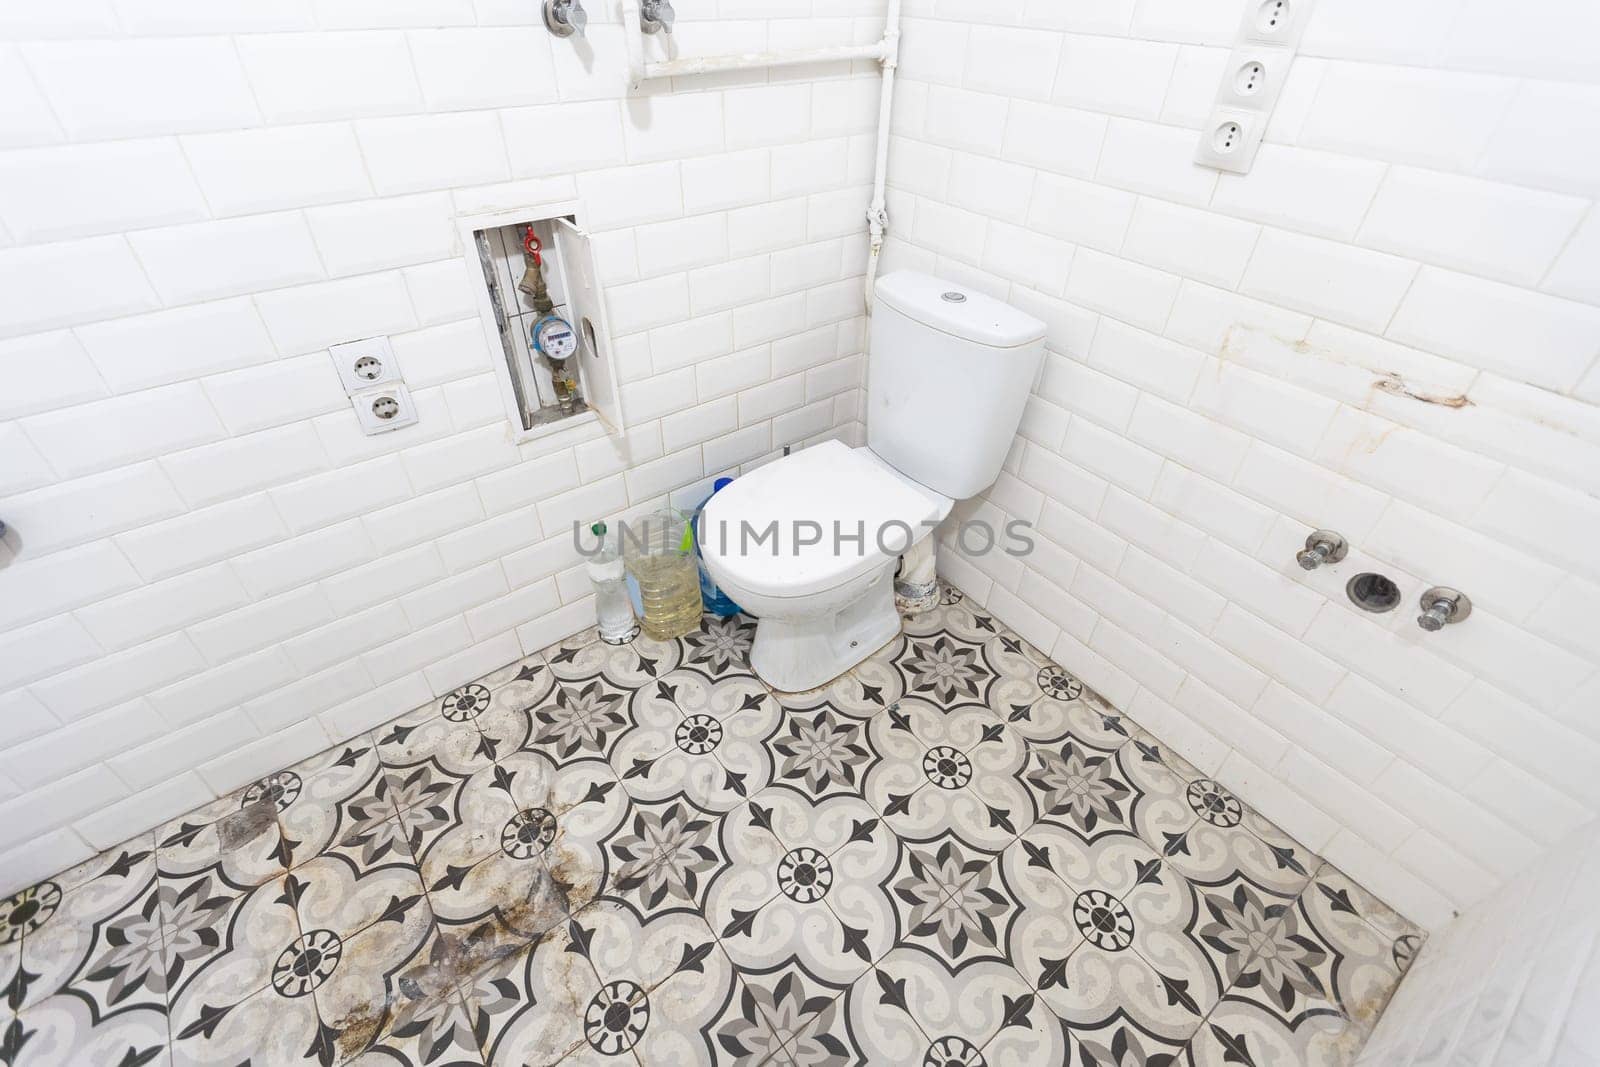 Interior of narrow restroom with wall hung toilet with white walls and checkered floor by Andelov13